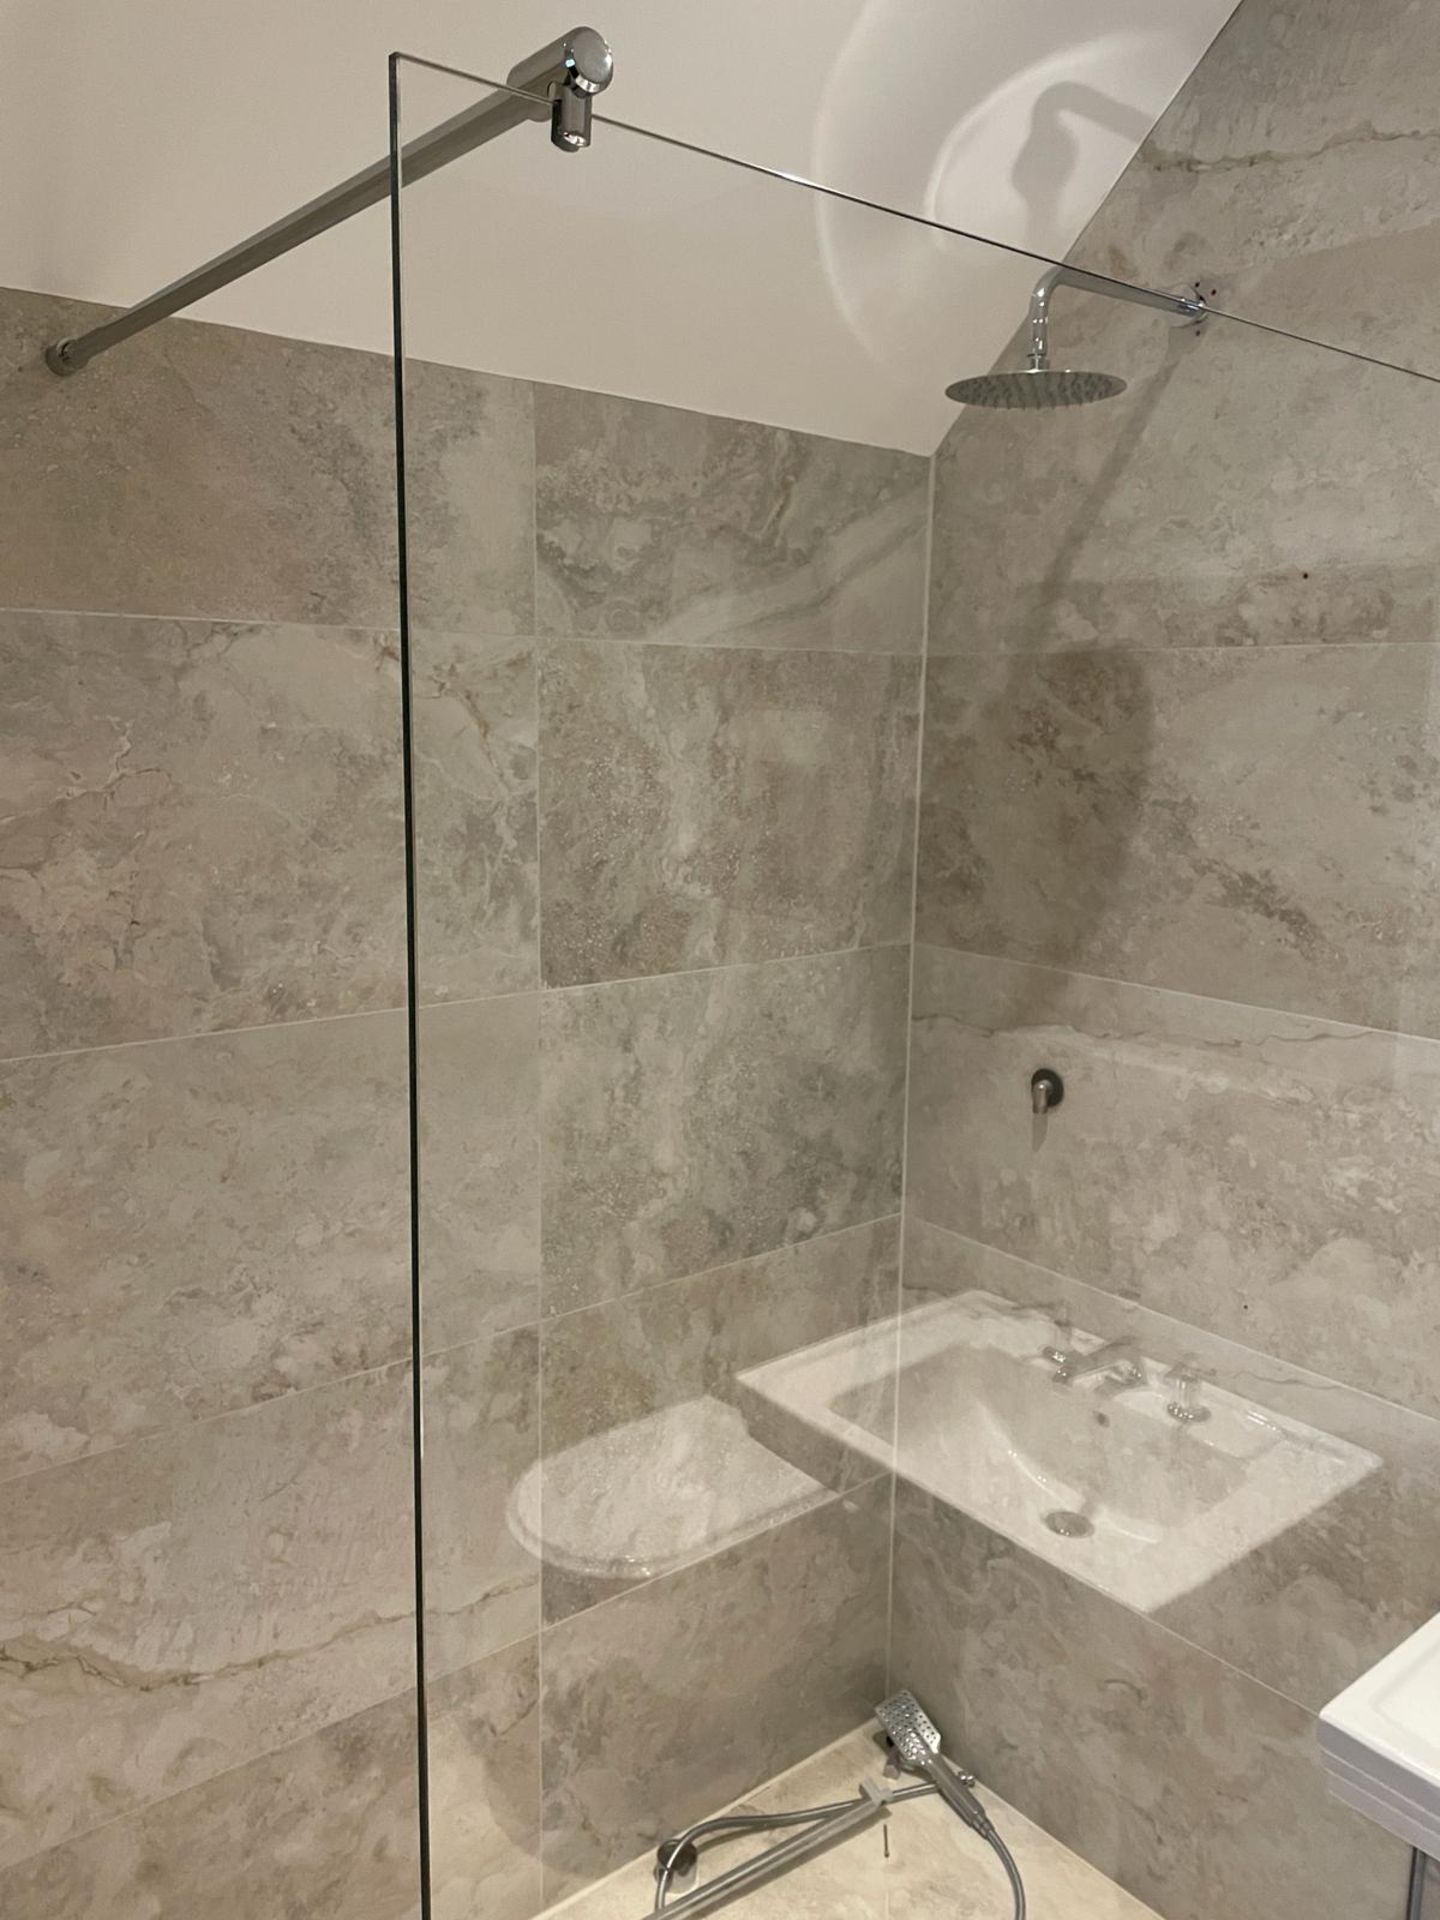 1 x Hansgrohe AXOR Premium Shower and Enclosure - Ref: PAN274 / Bed2bth - CL896 - NO VAT ON THE